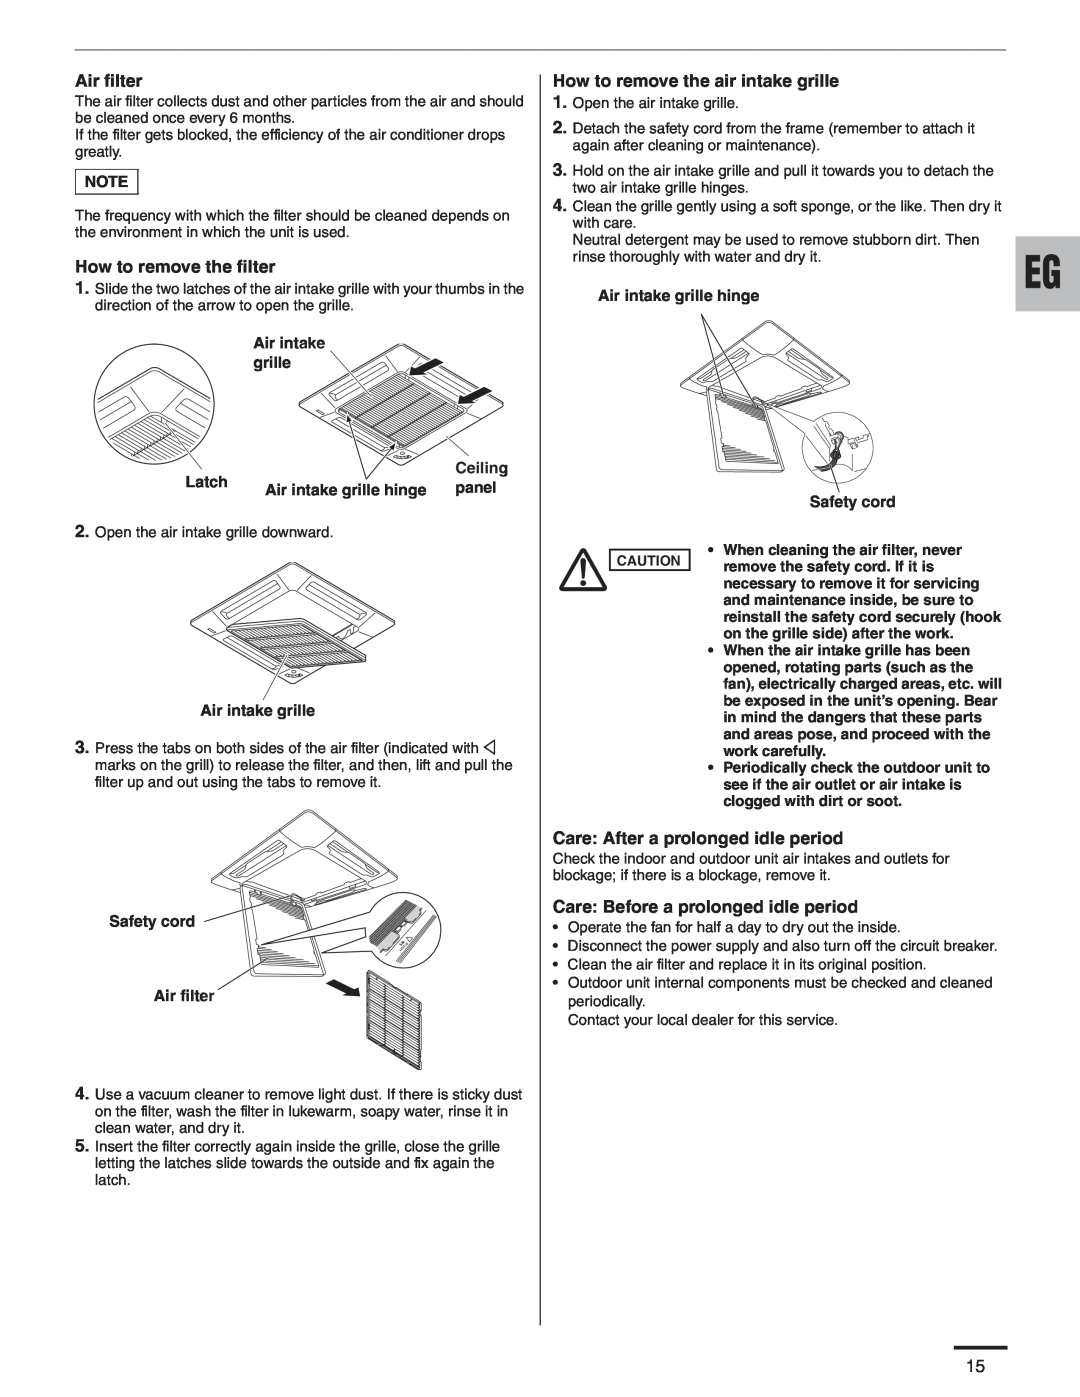 Panasonic CZ-18BT1U Air filter, How to remove the filter, How to remove the air intake grille, Latch, Ceiling, panel 